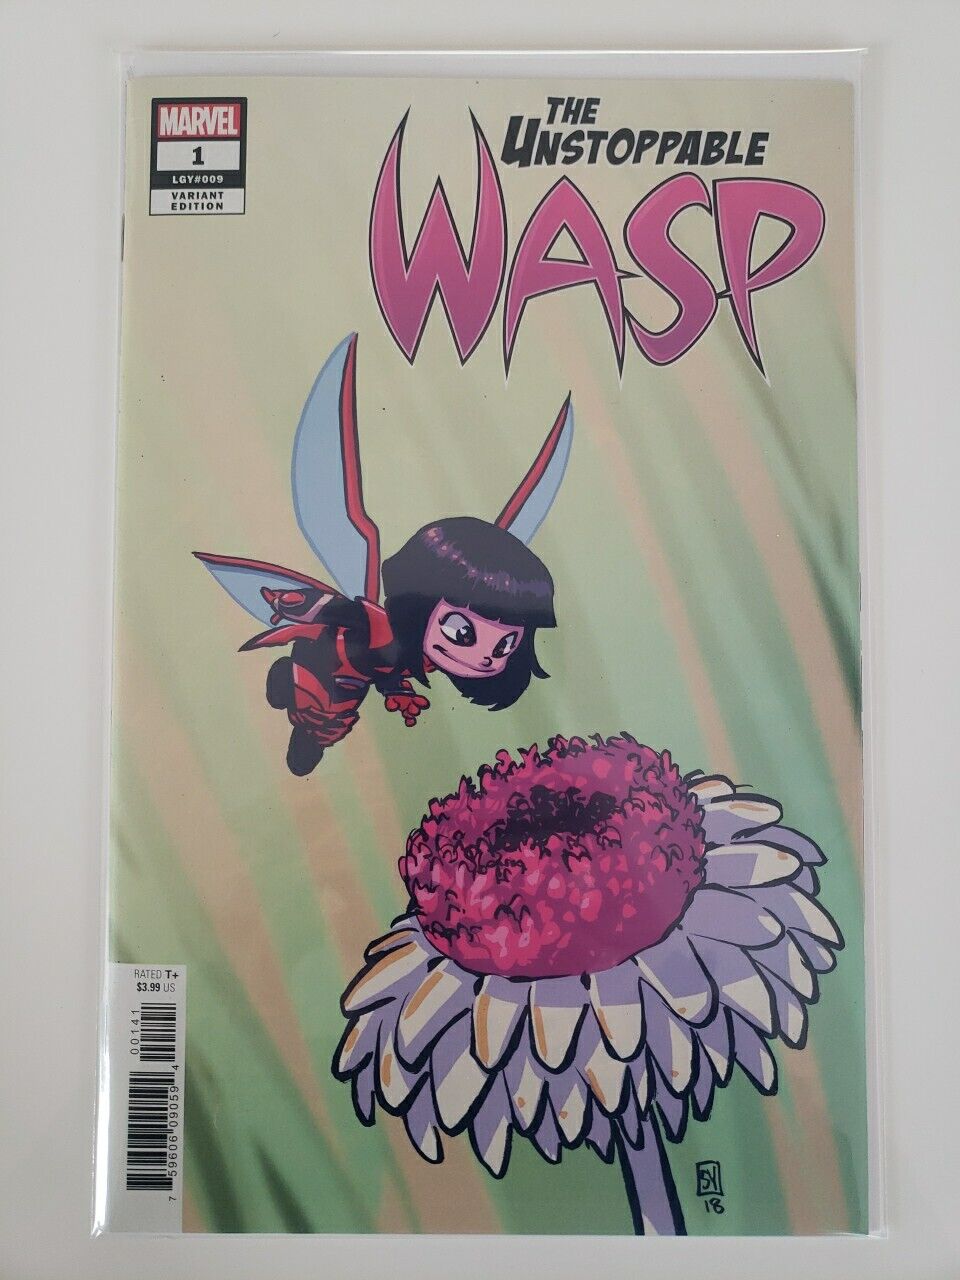 Marvel Comics THE UNSTOPPABLE WASP #1 (#9 Legacy) SKOTTIE YOUNG Variant Cover